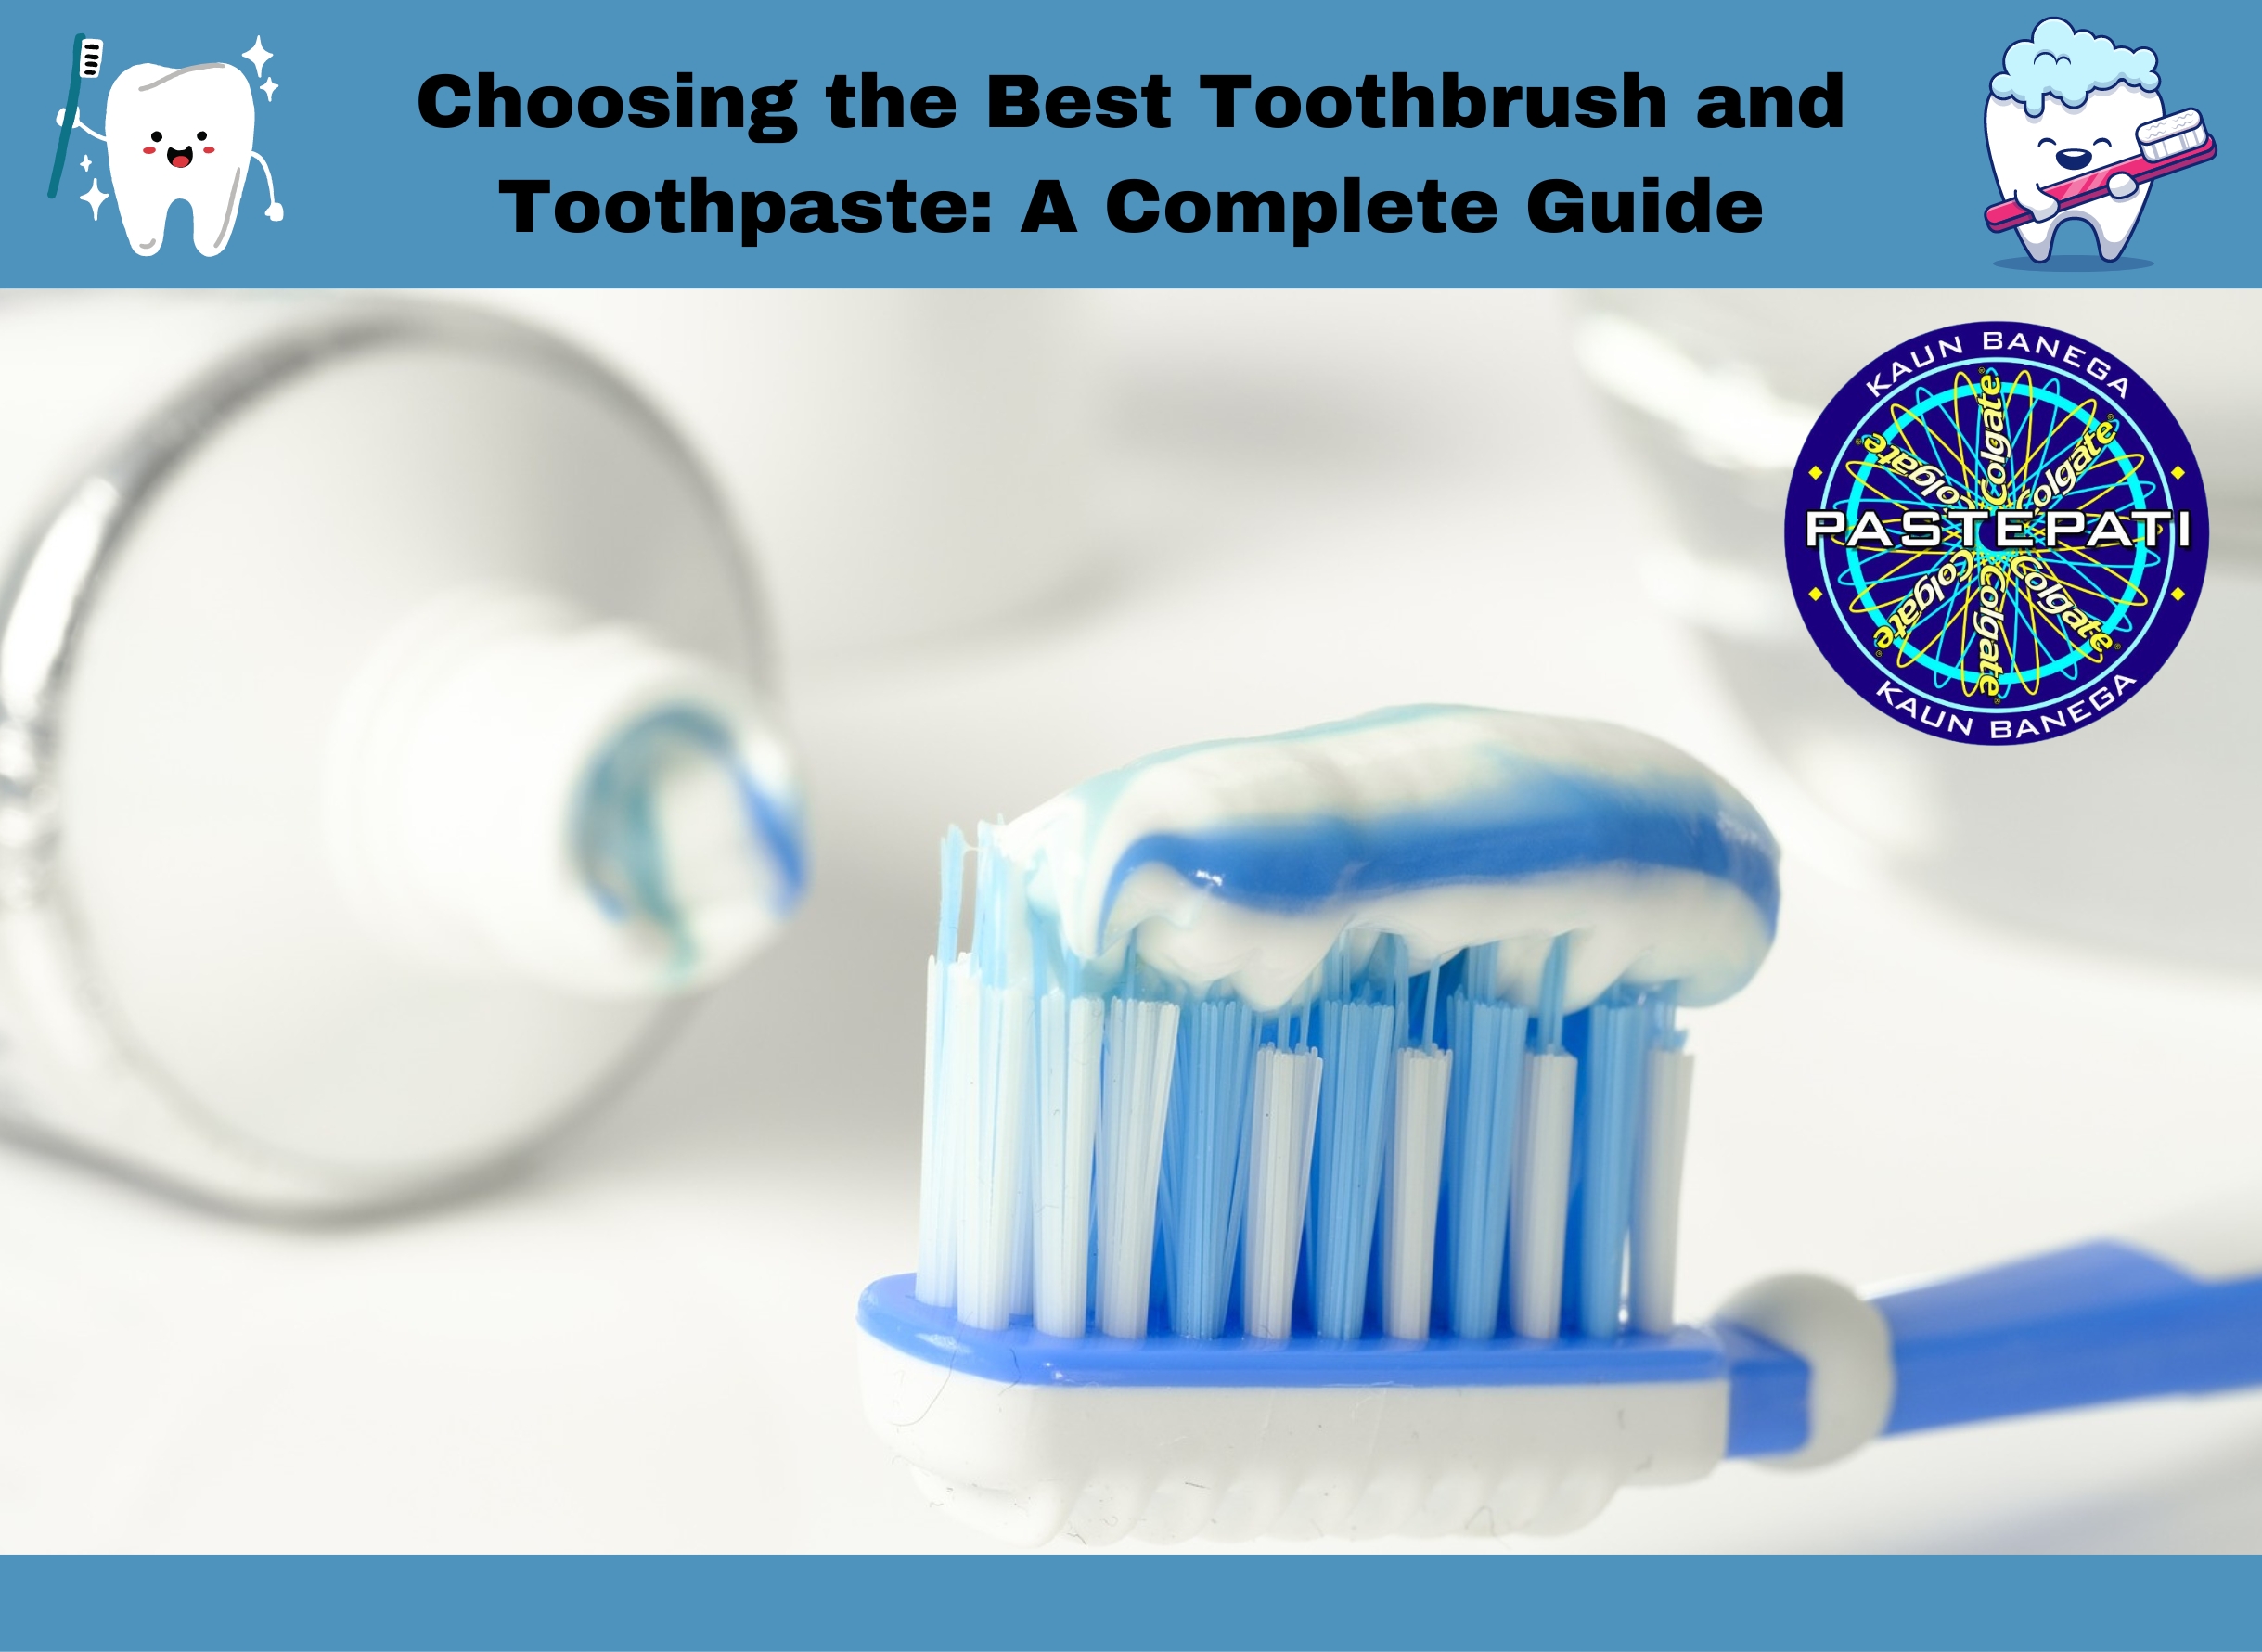 Choosing the Best Toothbrush and Toothpaste: A Complete Guide